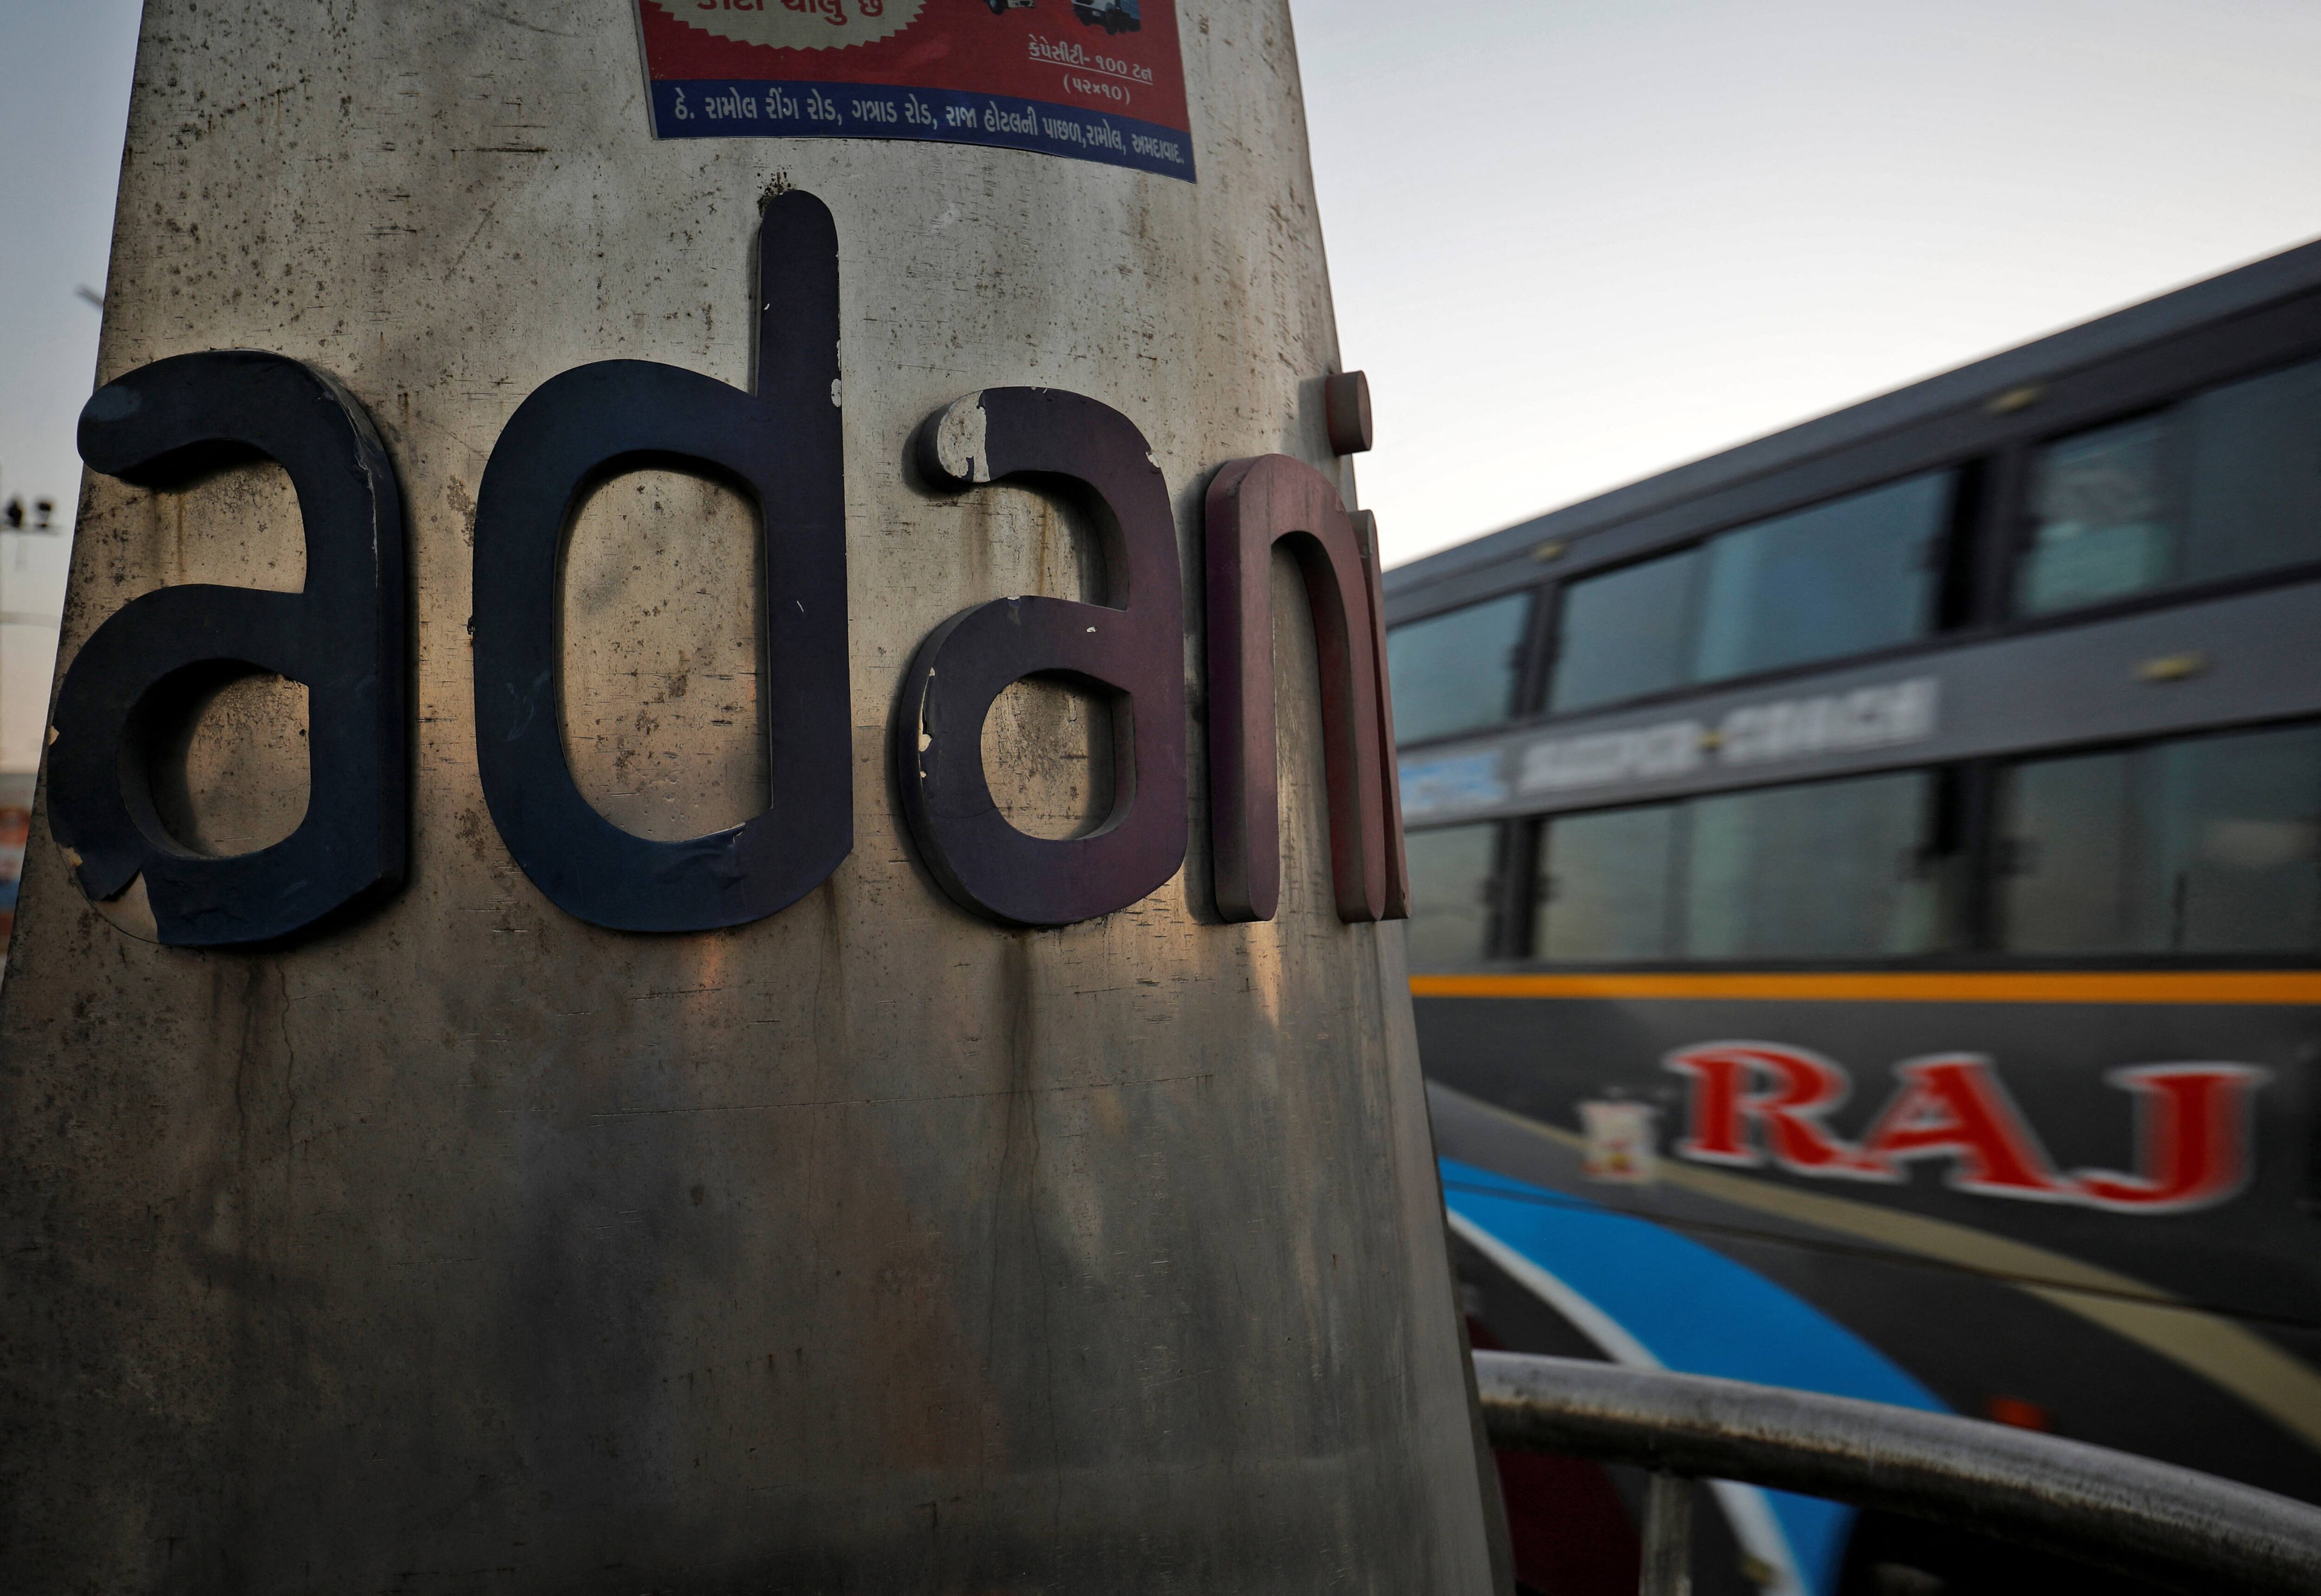 A passenger bus moves past the logo of the Adani Group installed at a roundabout on the ring road in Ahmedabad, India, February 2, 2023. REUTERS/Amit Dave